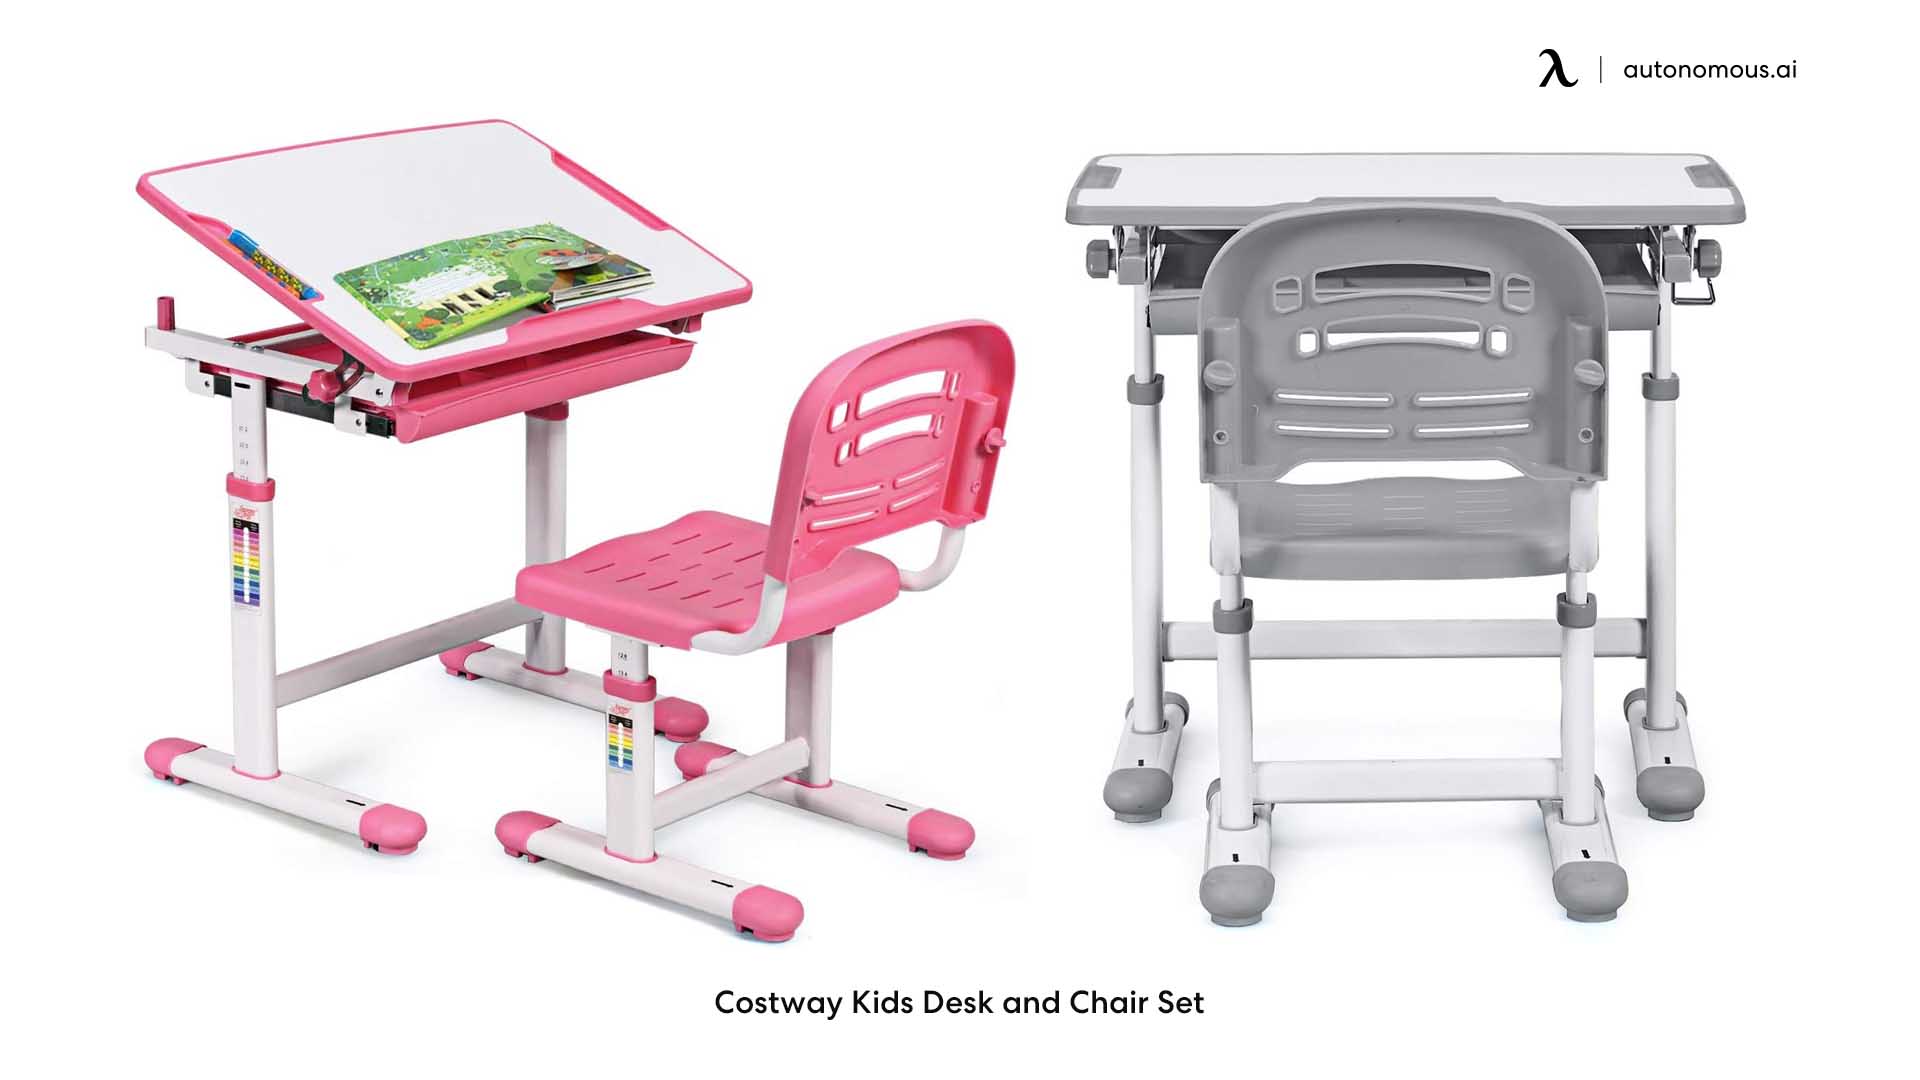 Costway Kids Desk and Chair Set